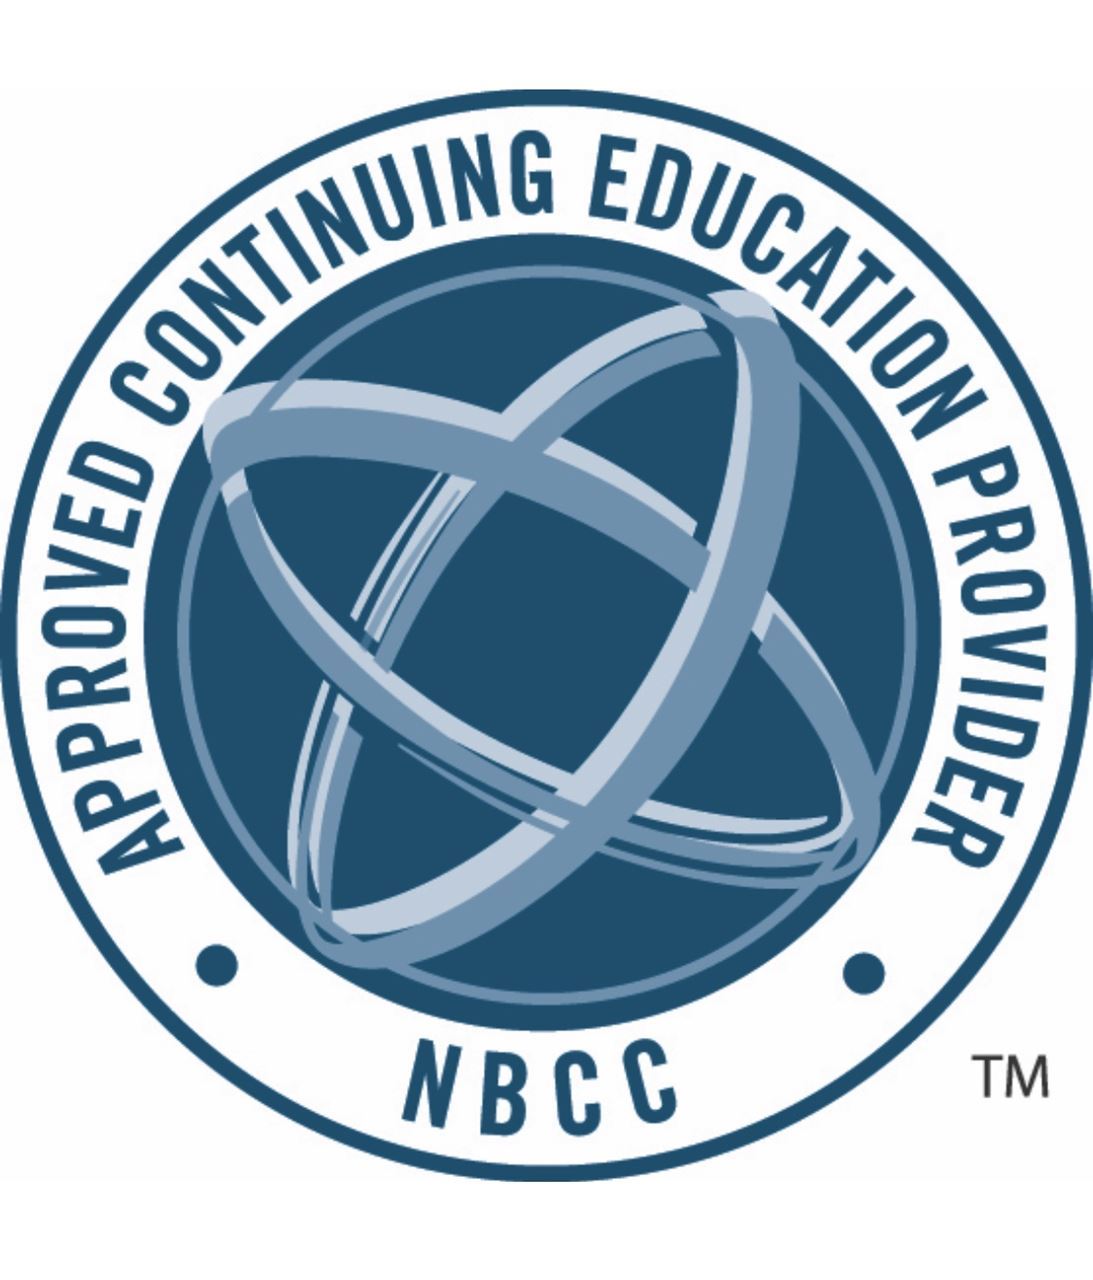 NBCC Approved Continuing Education Provider Seal